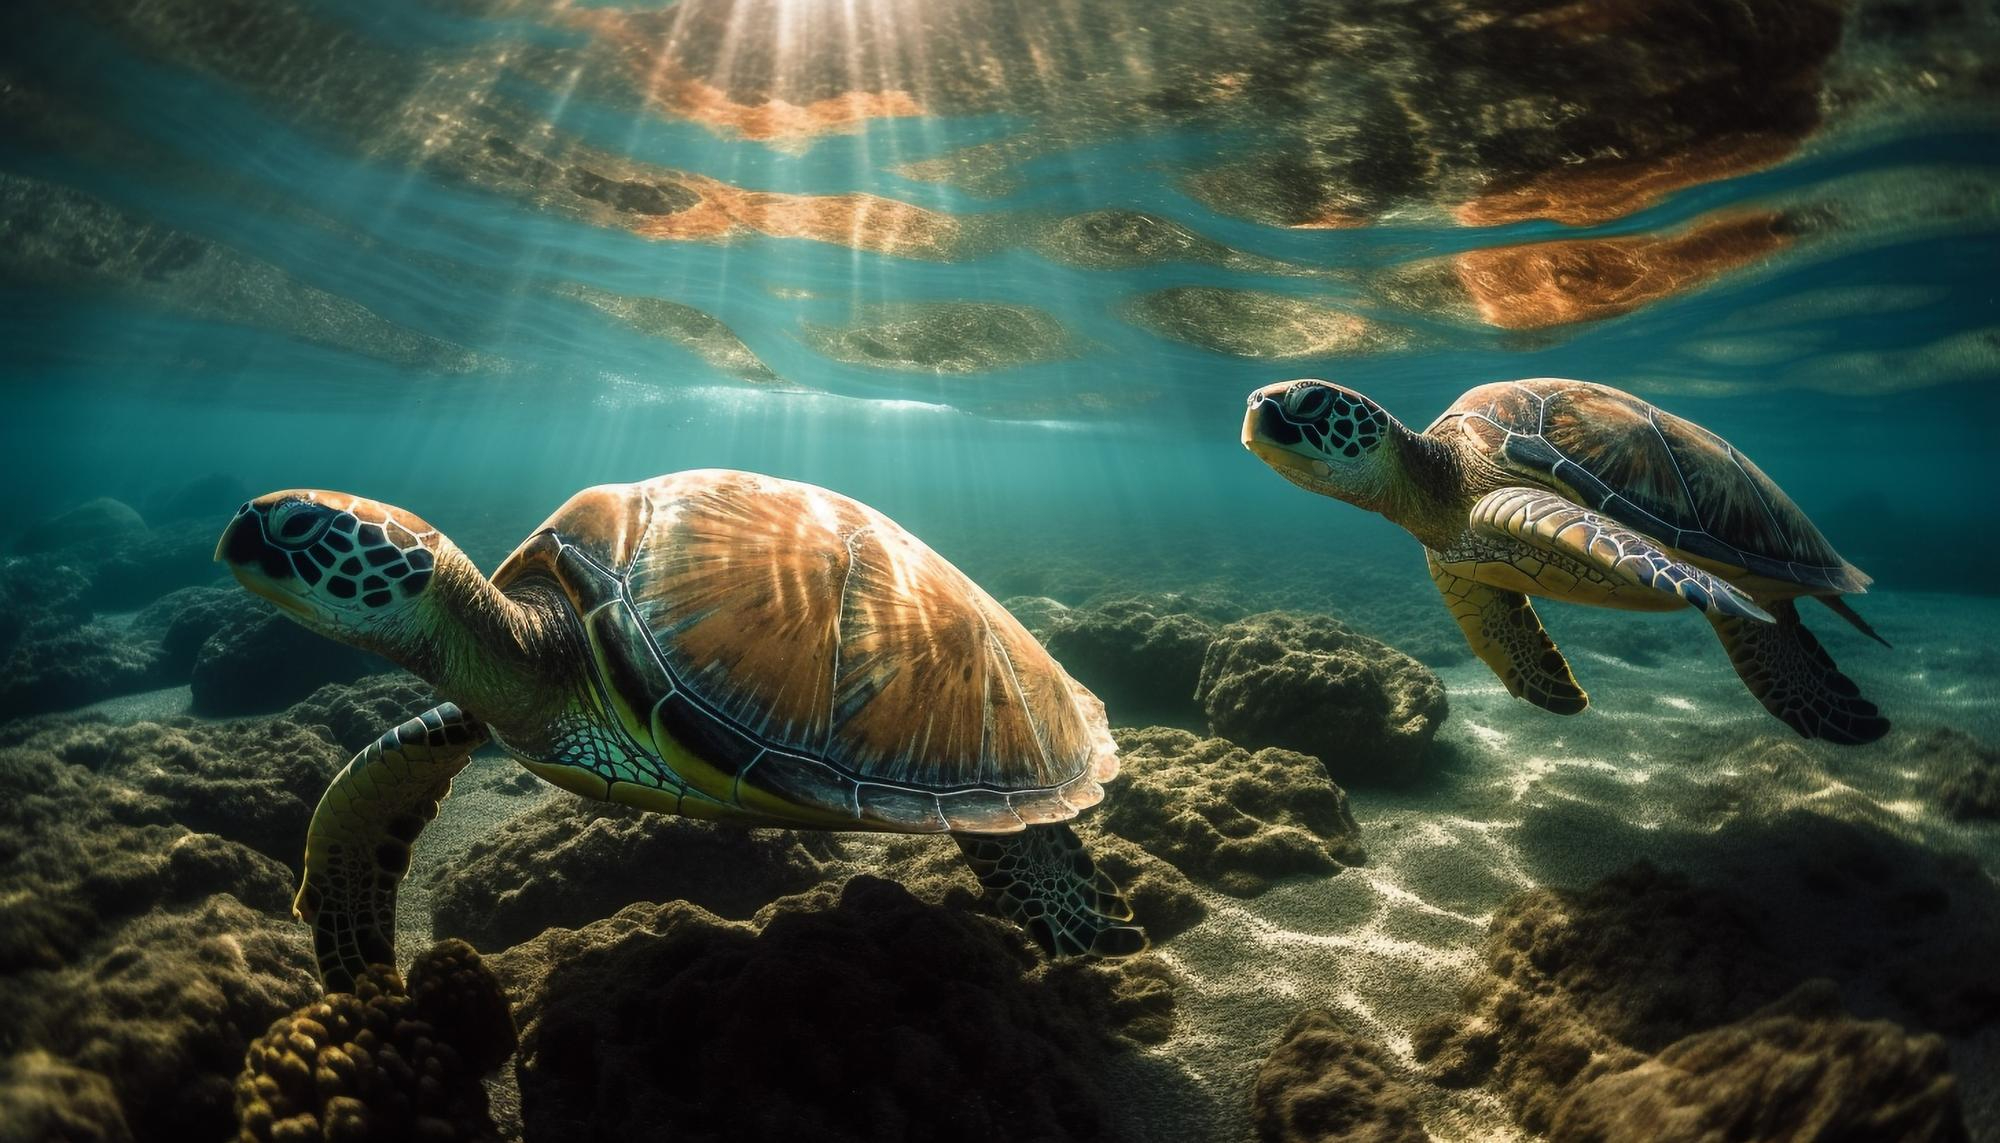 maui turtles and snorkelling - ultimate whale watch and snorkelling